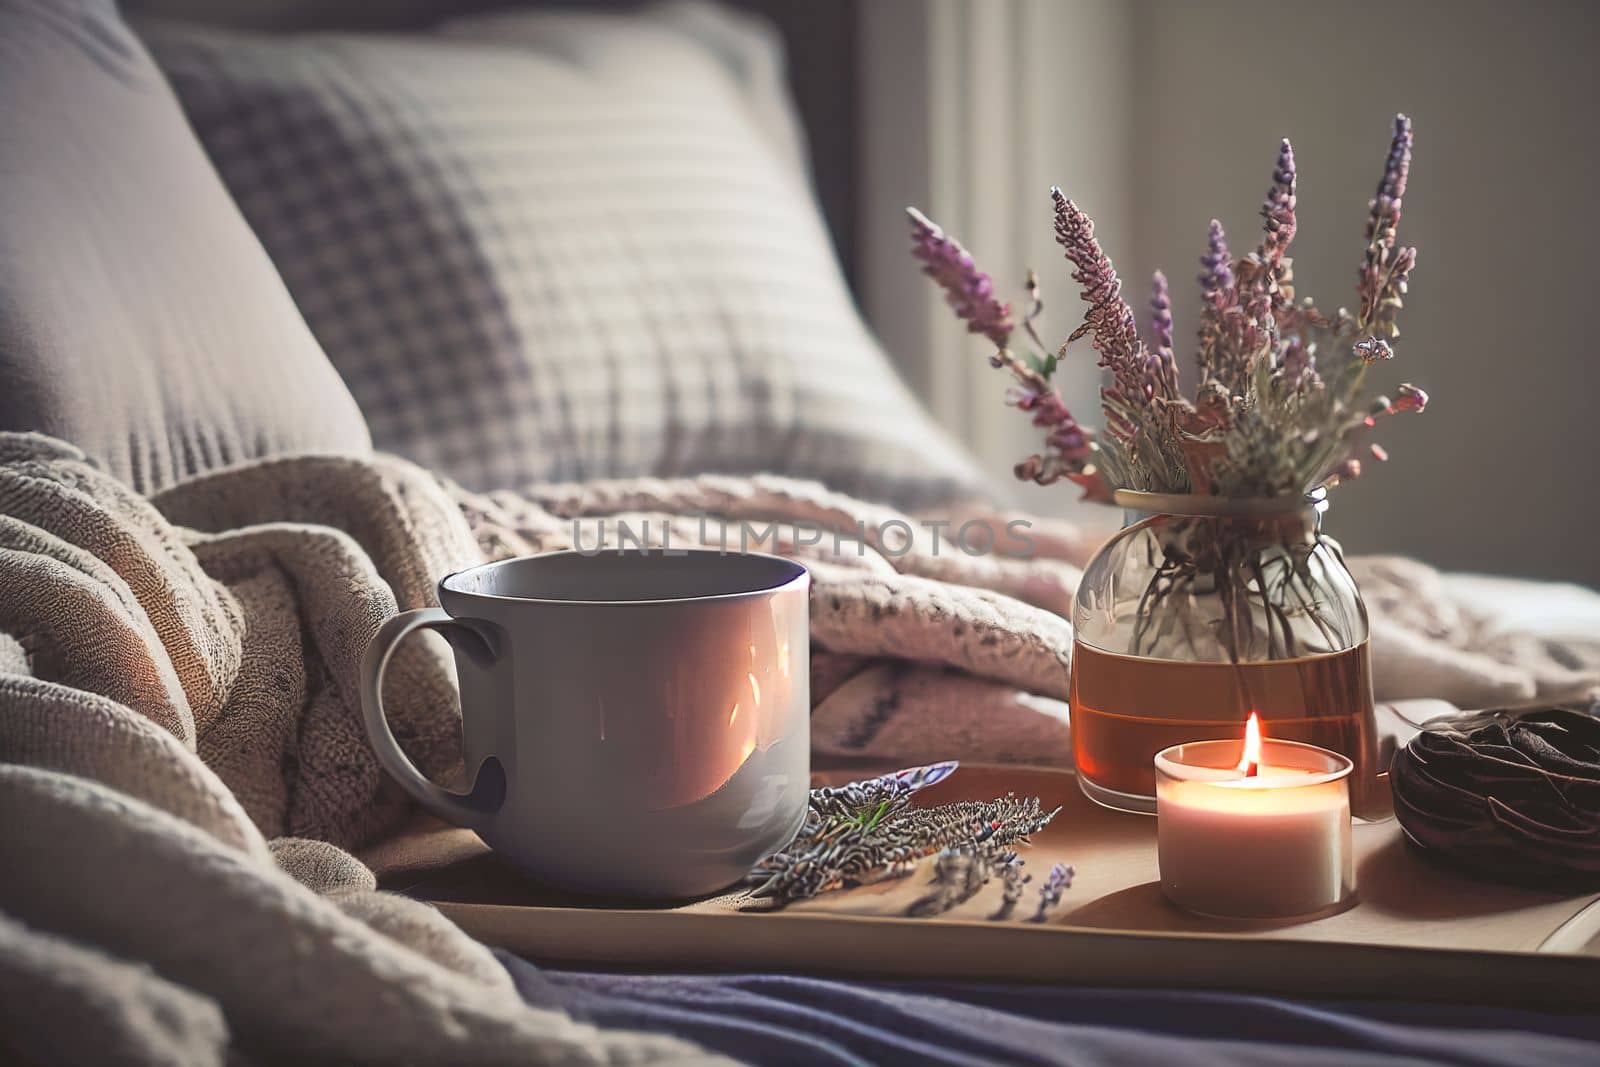 Cozy winter morning at home with hot coffee, warm blanket, candle lights, heather lavender flowers by FokasuArt